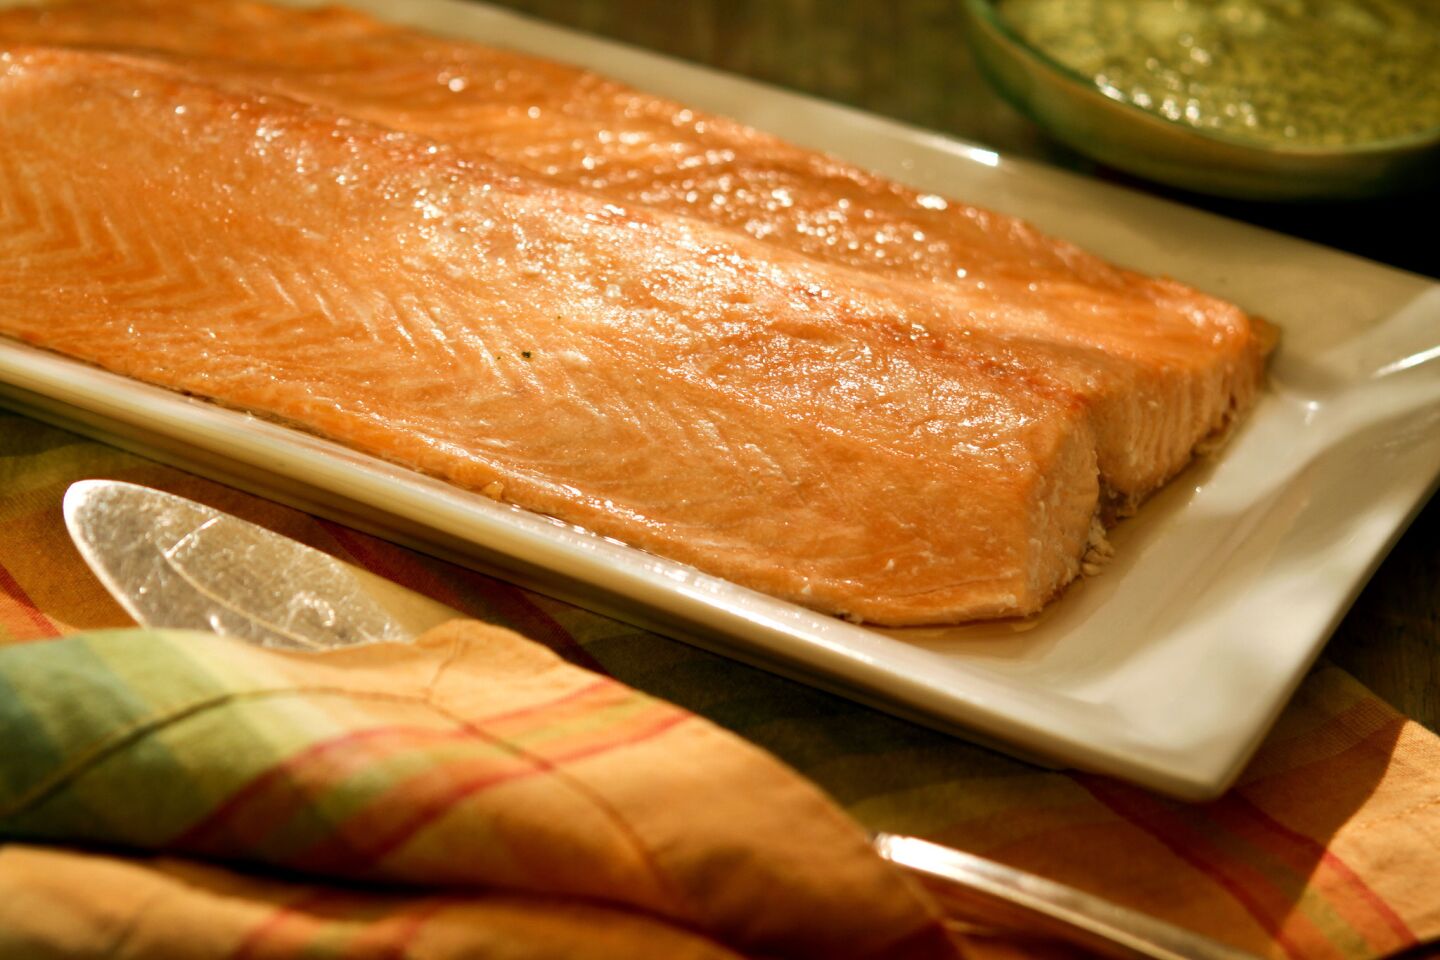 If you're looking for easy, it doesn't get much better than oven-steamed salmon.